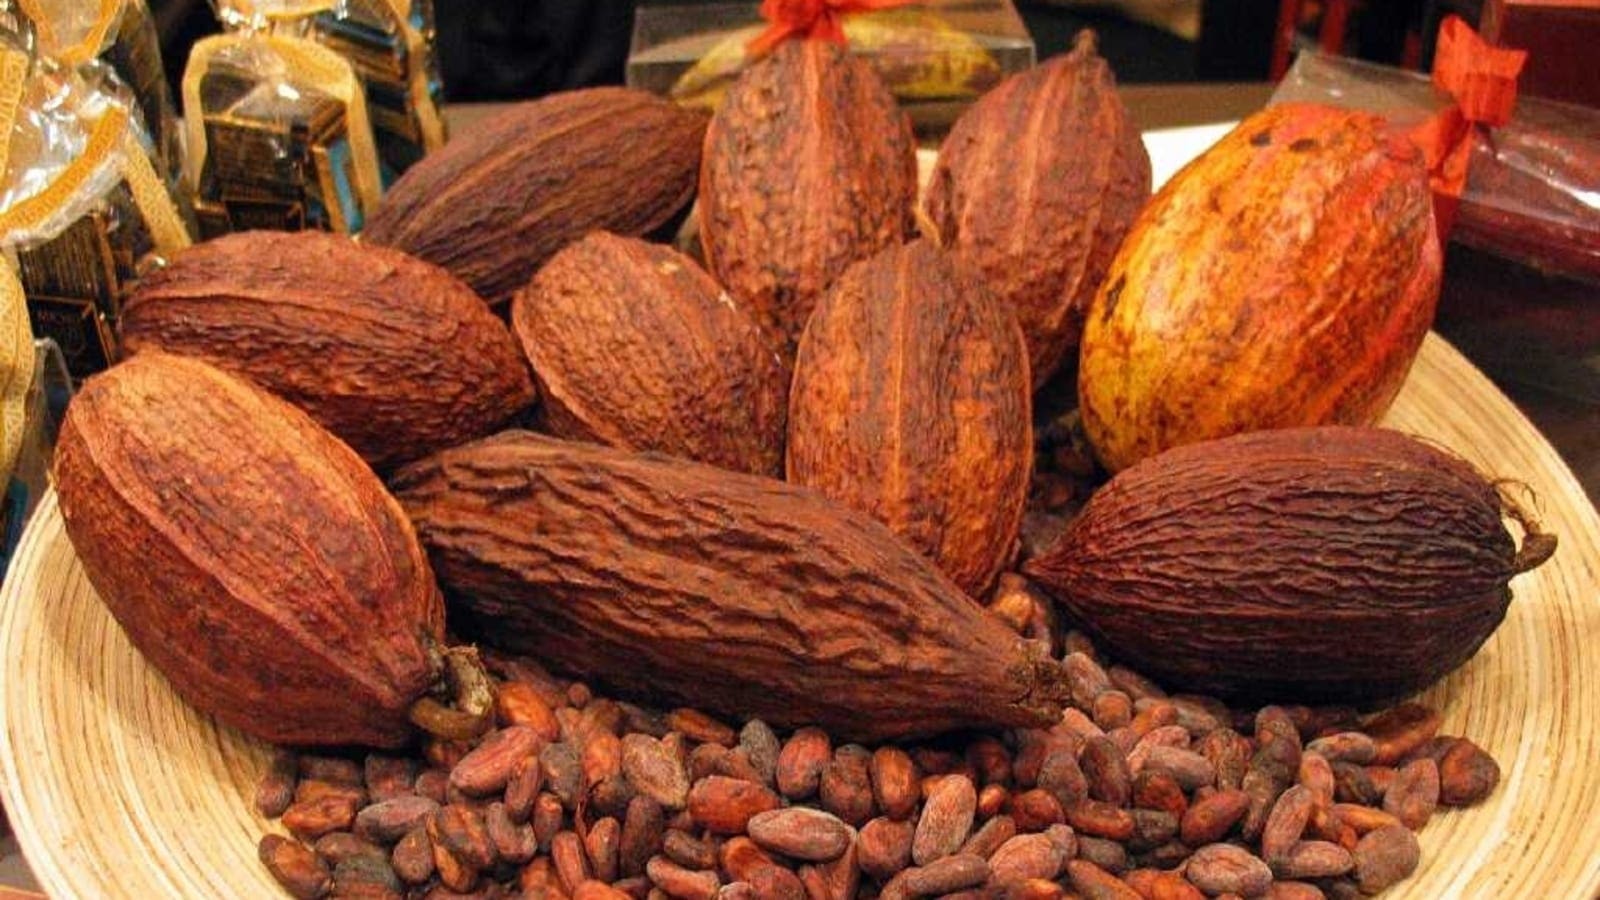 Cameroon custom agency anticipates collecting US$41.2m from cocoa beans export tax